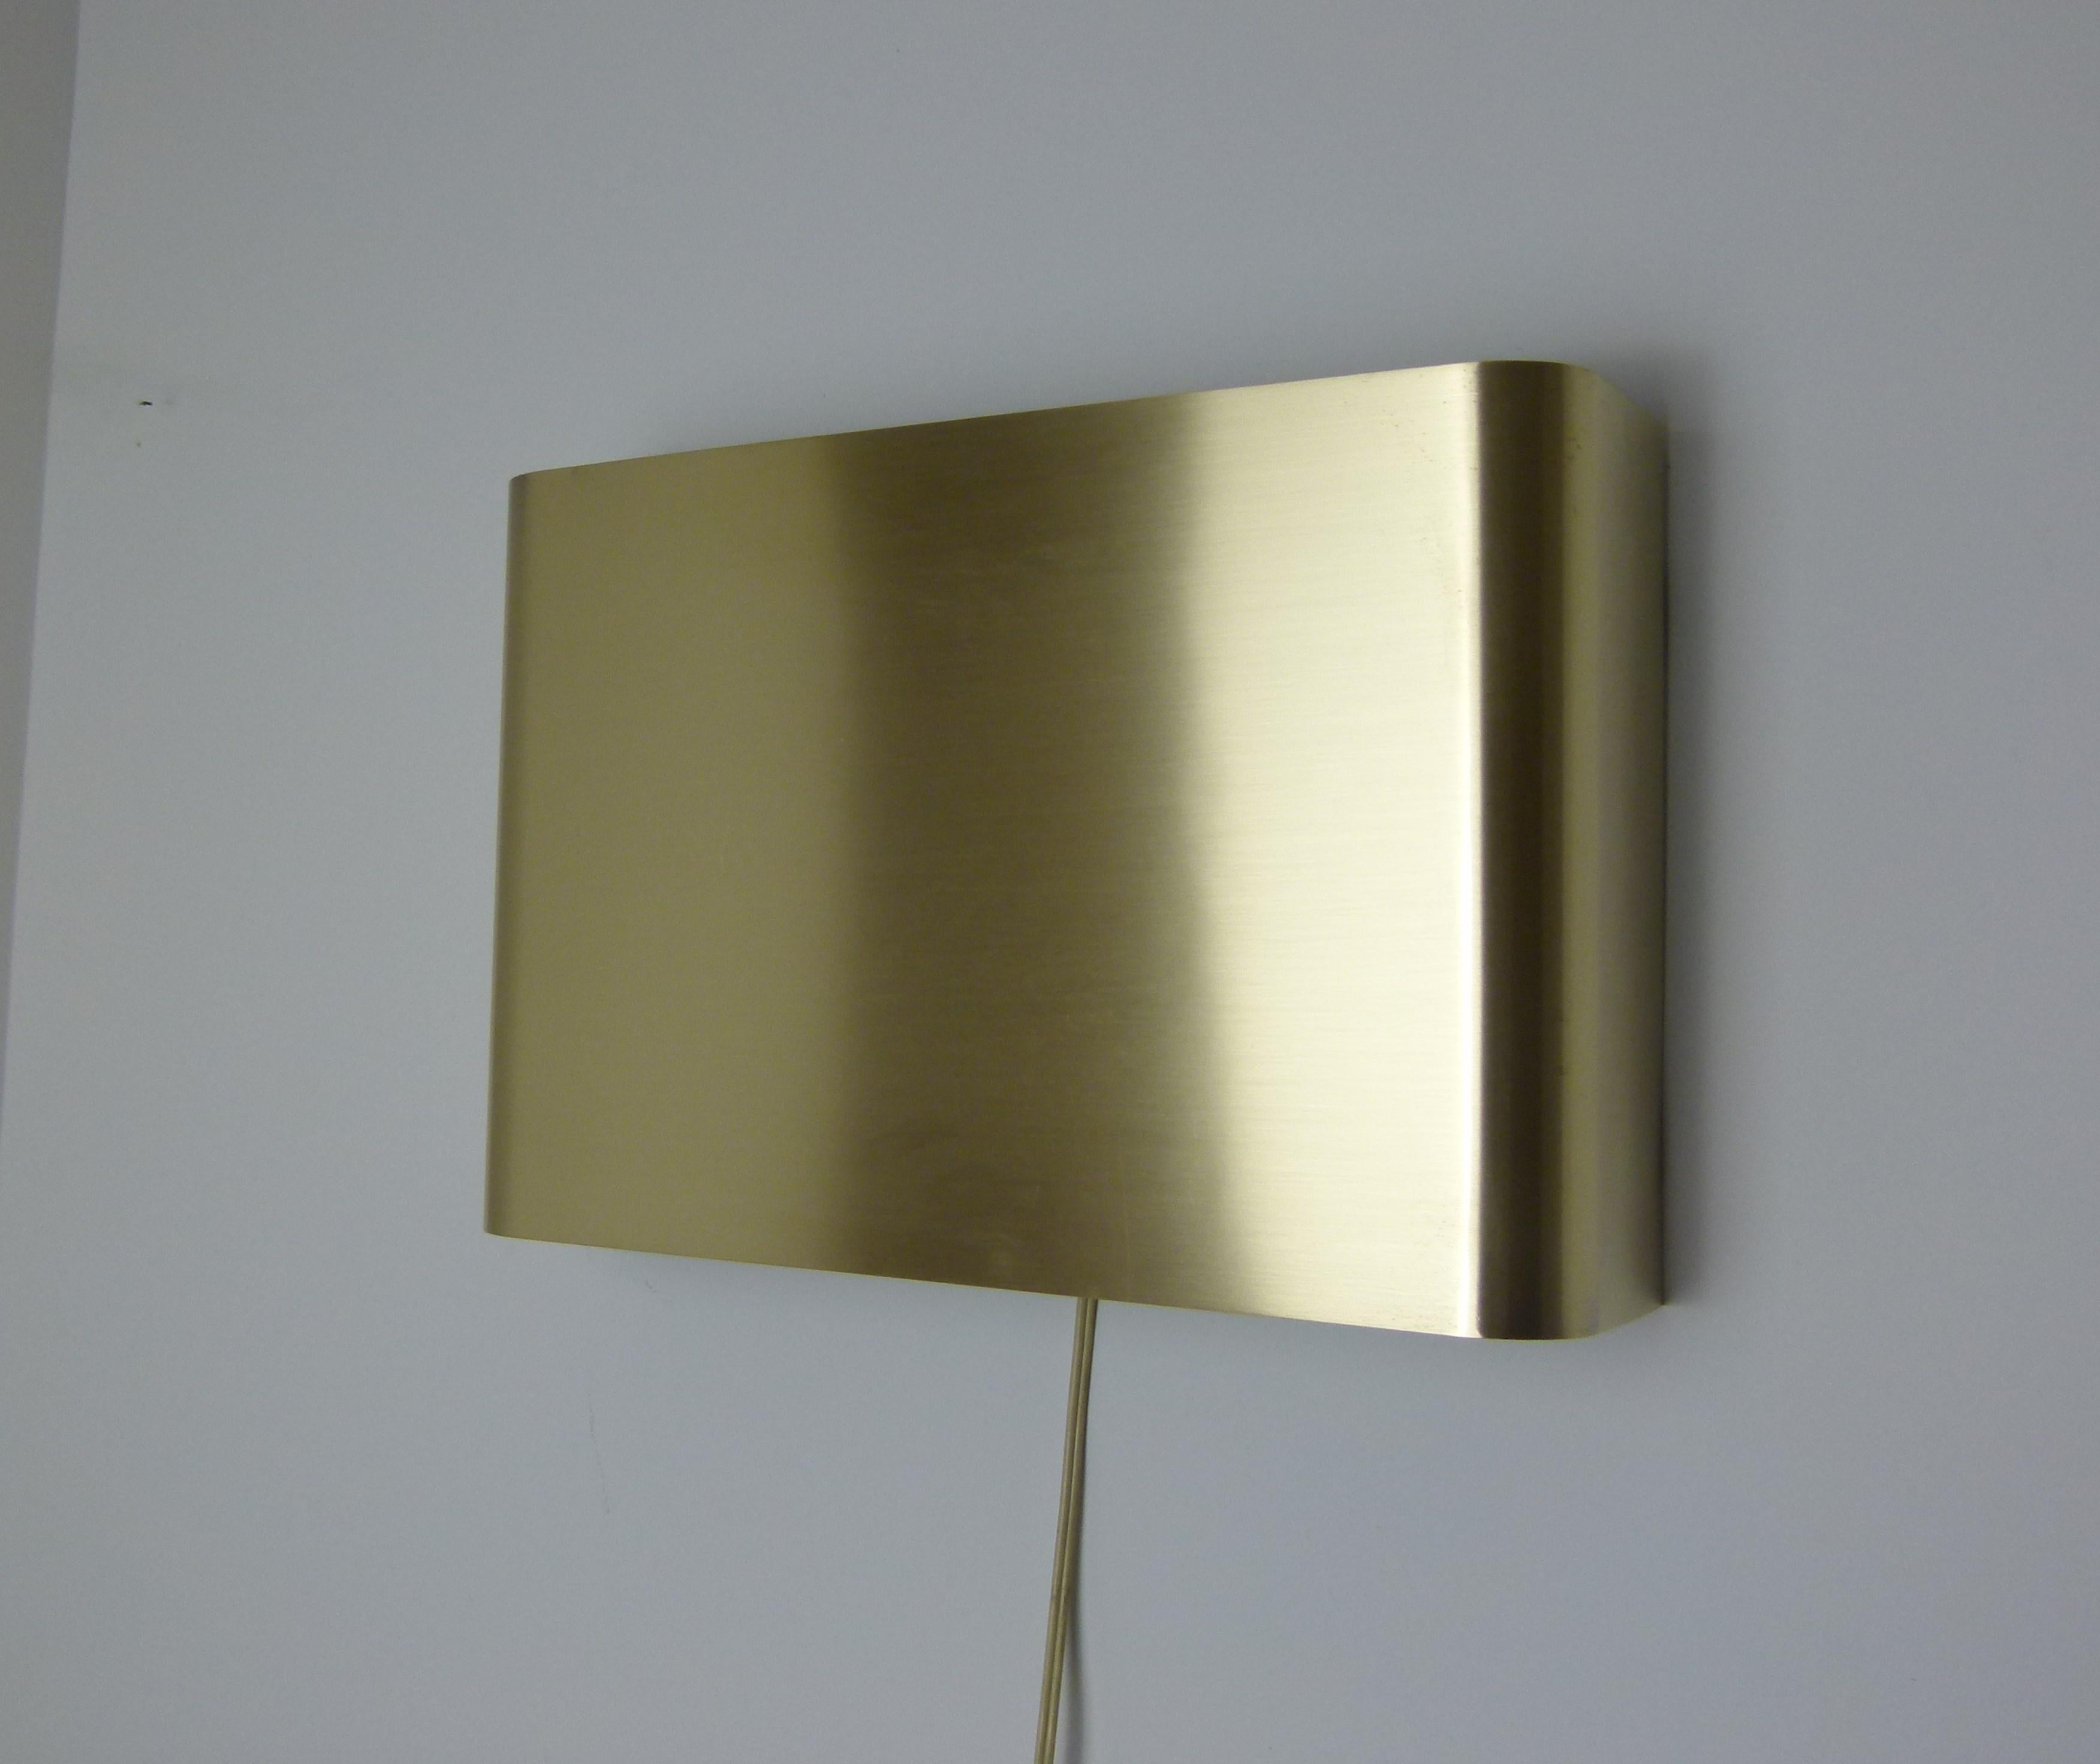 Pair of rectangular brushed brass sconces, double light.
French work of Maison Charles, circa 1970-1975
Signed Charles Made in France
New wiring to EU standards, works for US standards.
Adapters will be provided for US bulb
Perfect